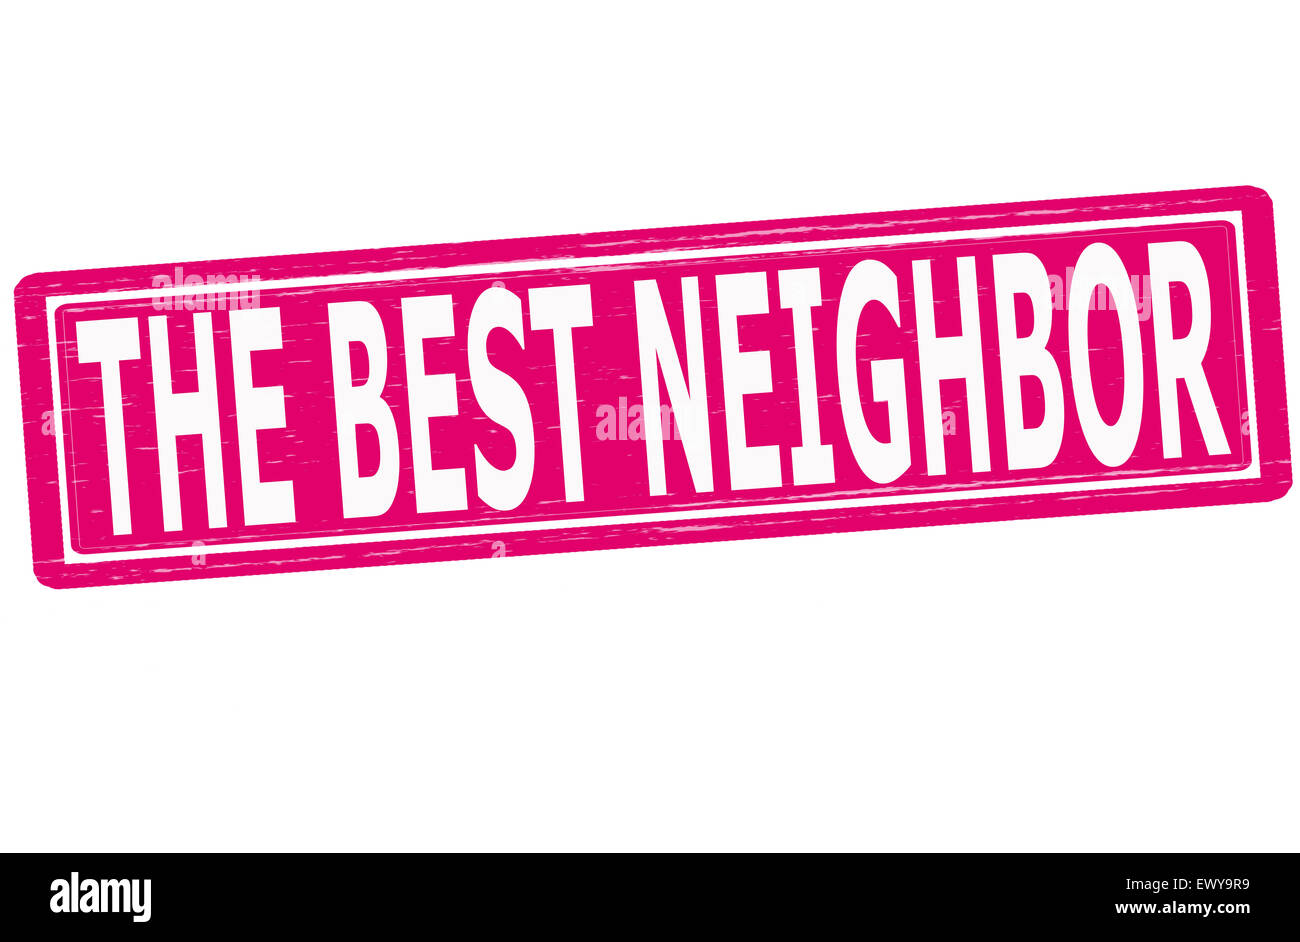 Stamp with text the best neighbor inside, illustration Stock Photo